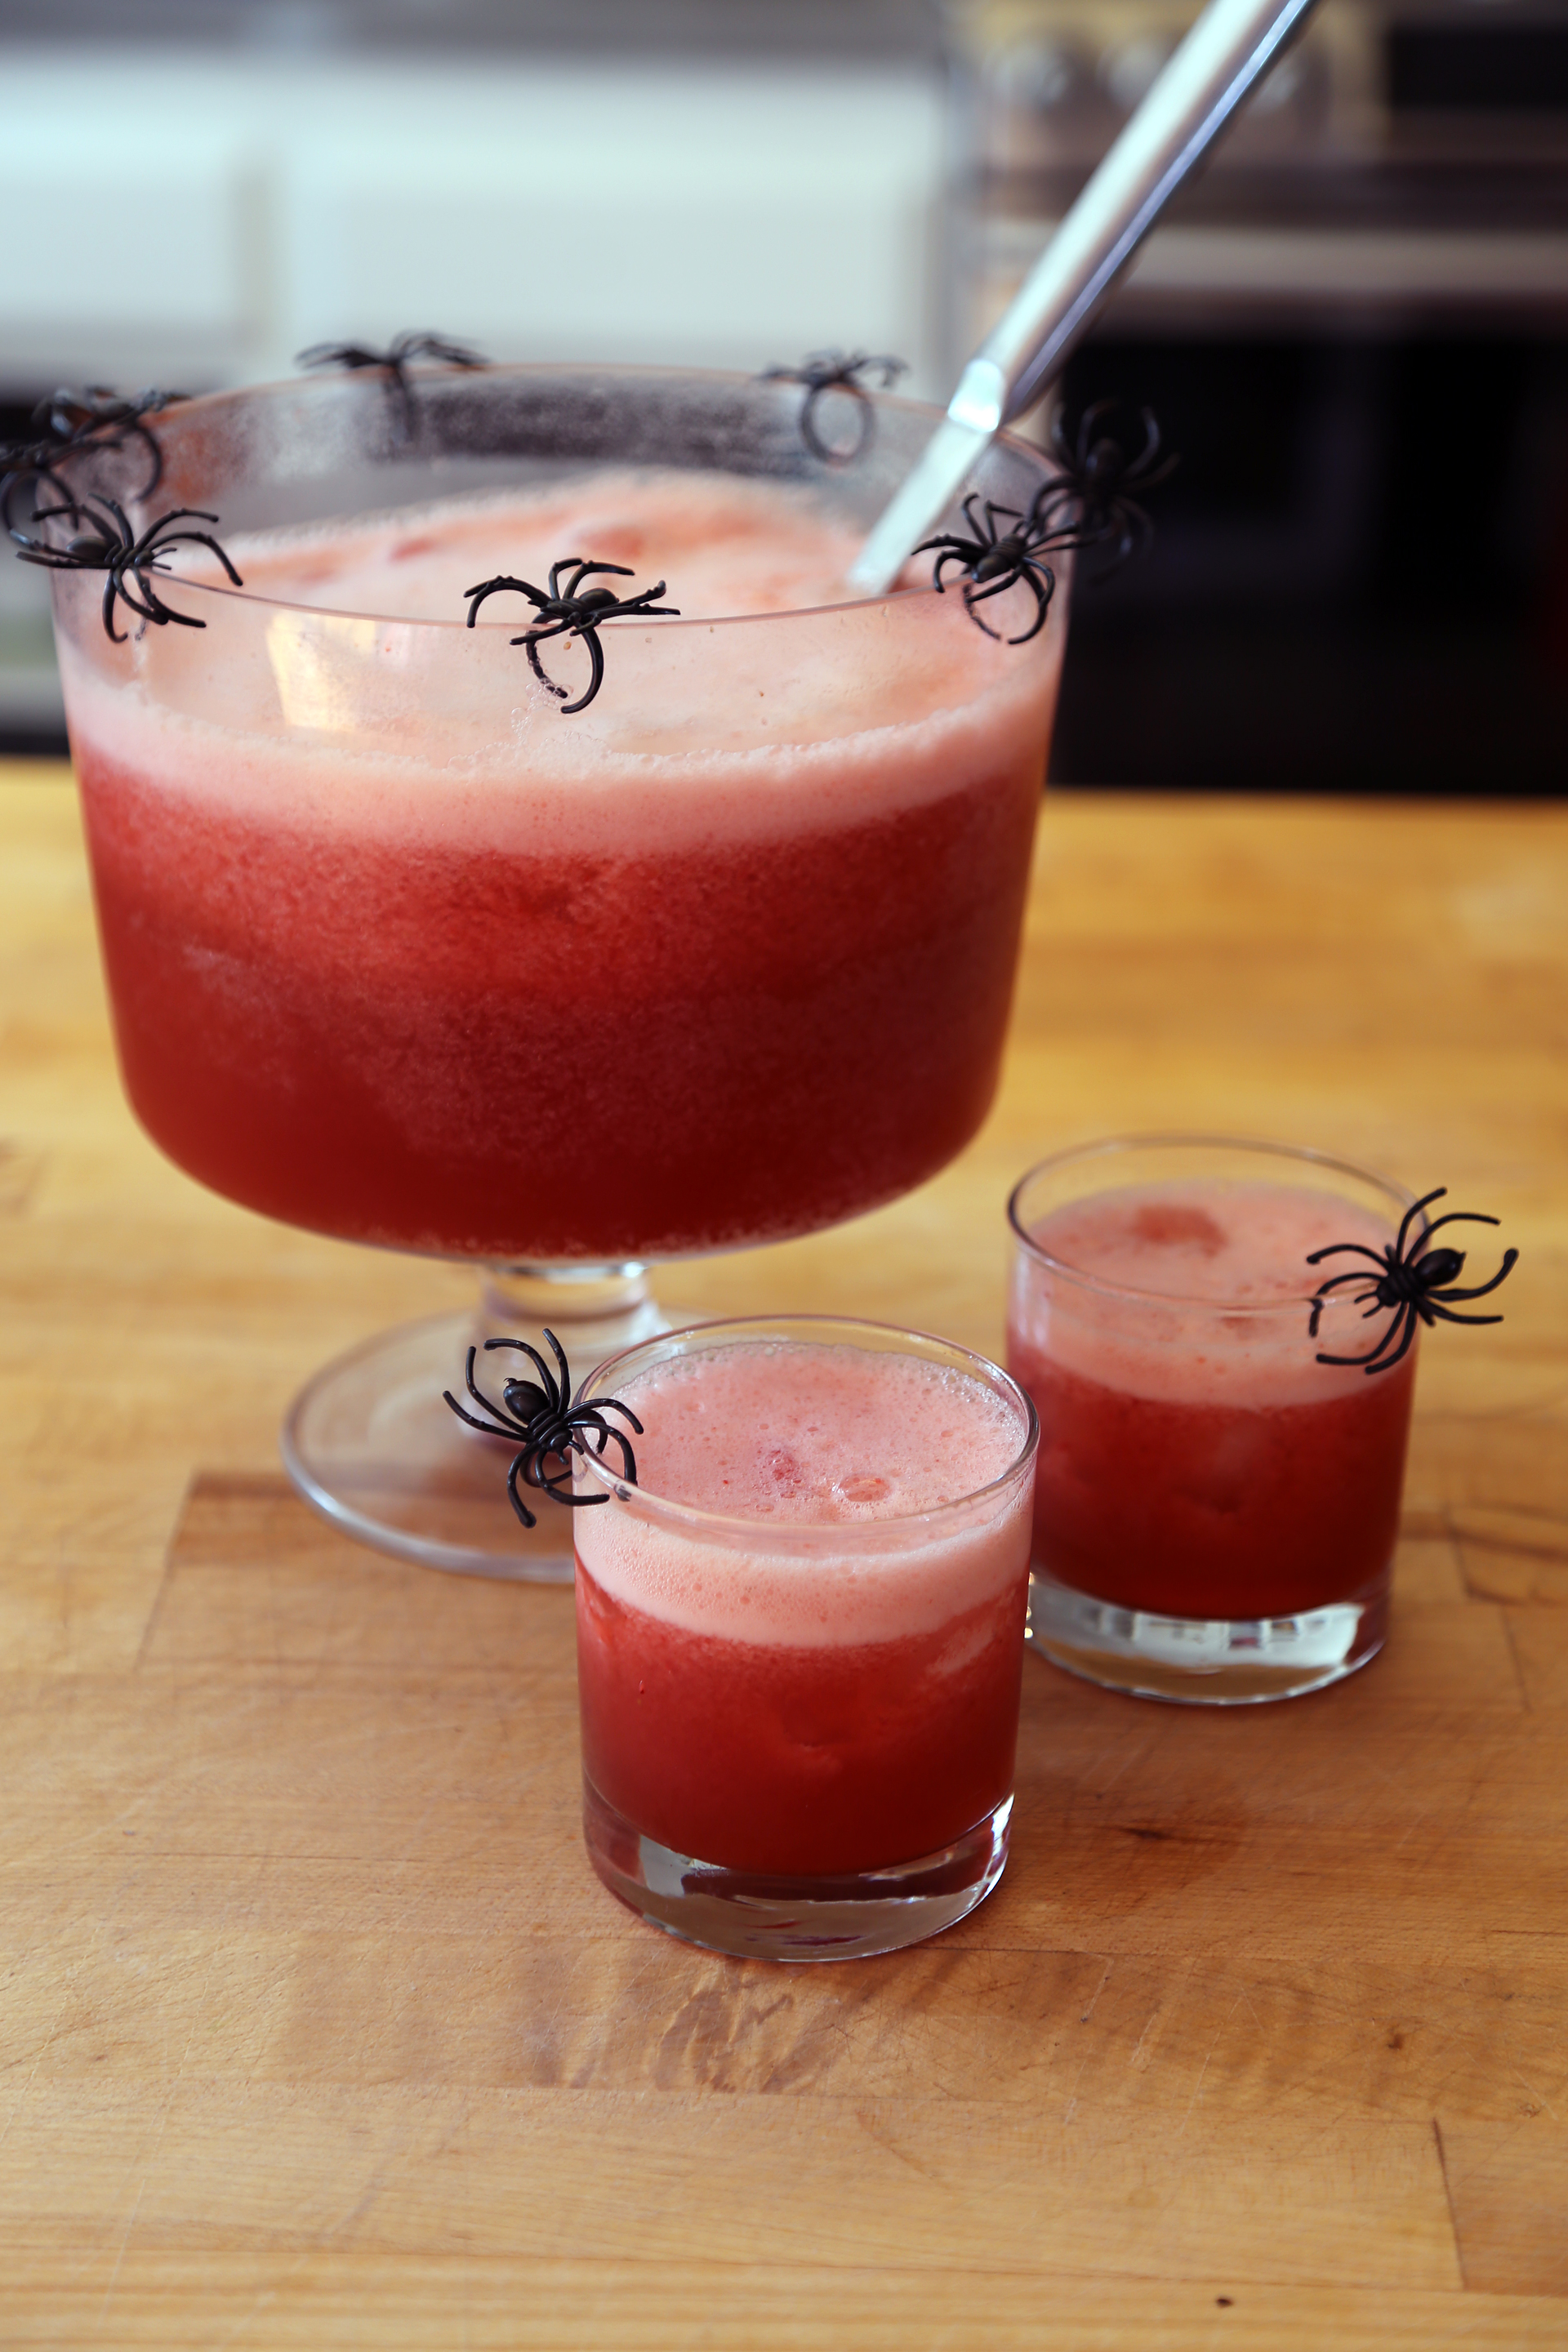 Add the ice cubes and garnish the bowl with terrifying creatures of the night. Serve.